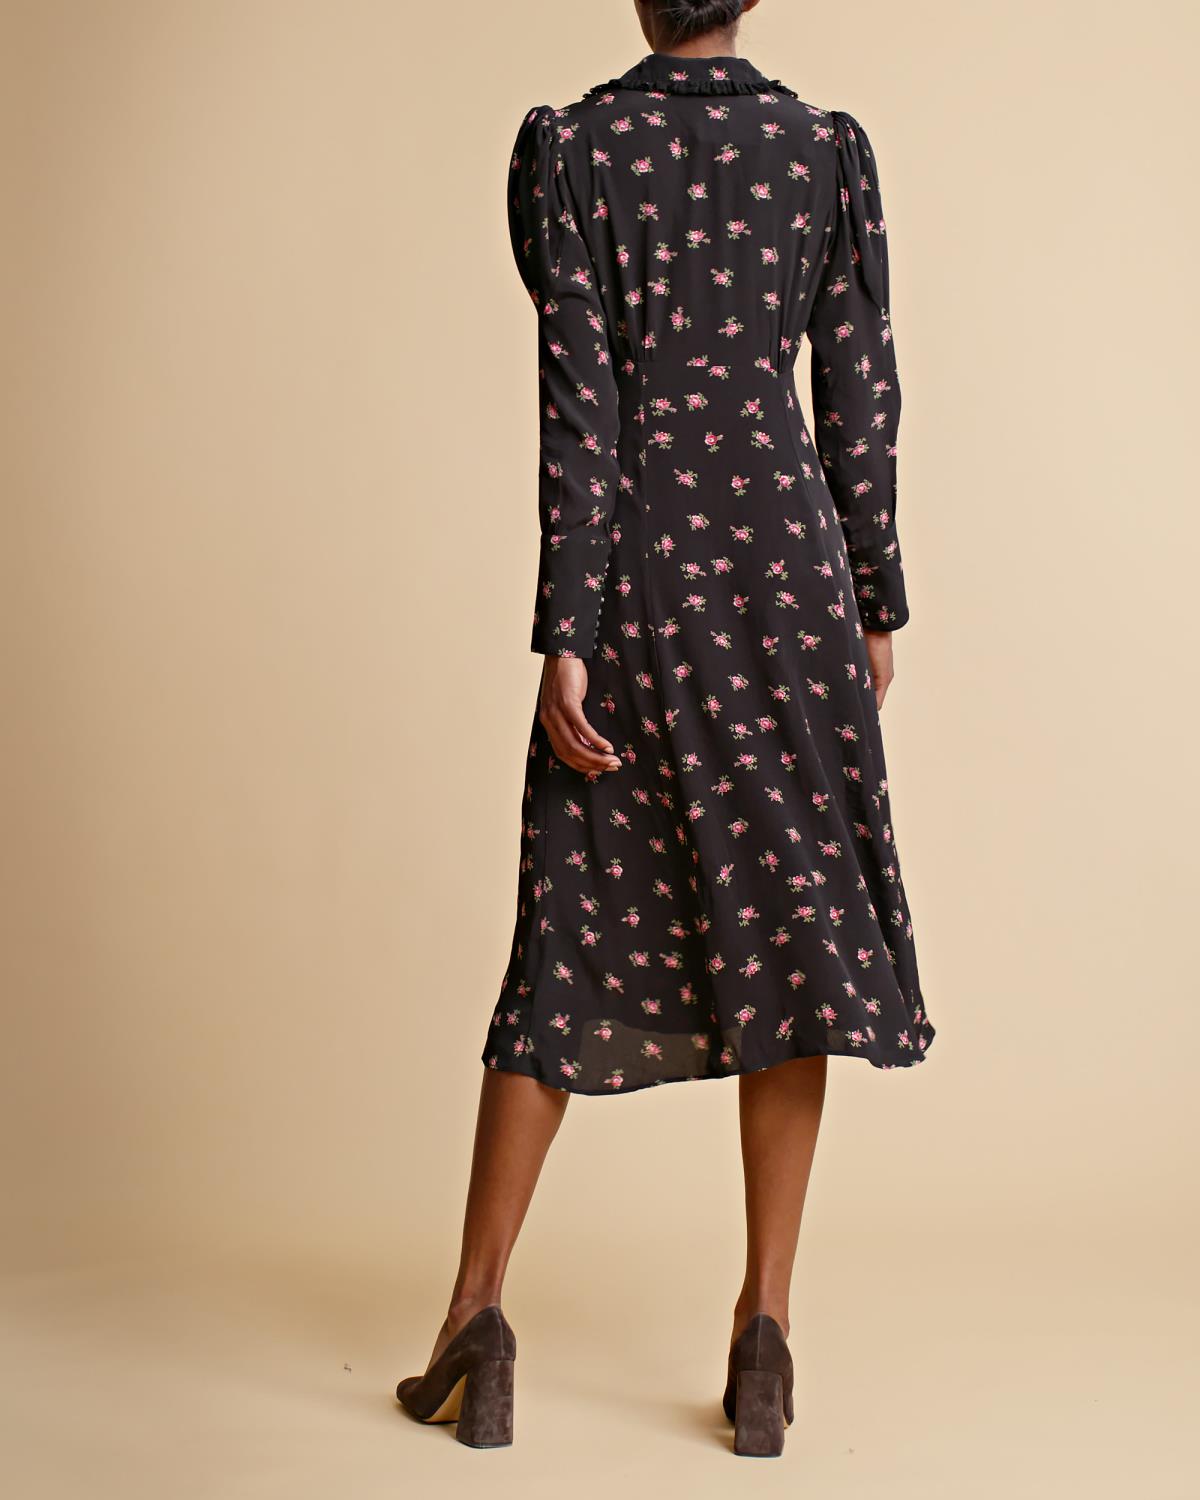 by TiMo. Automn collar dress roses